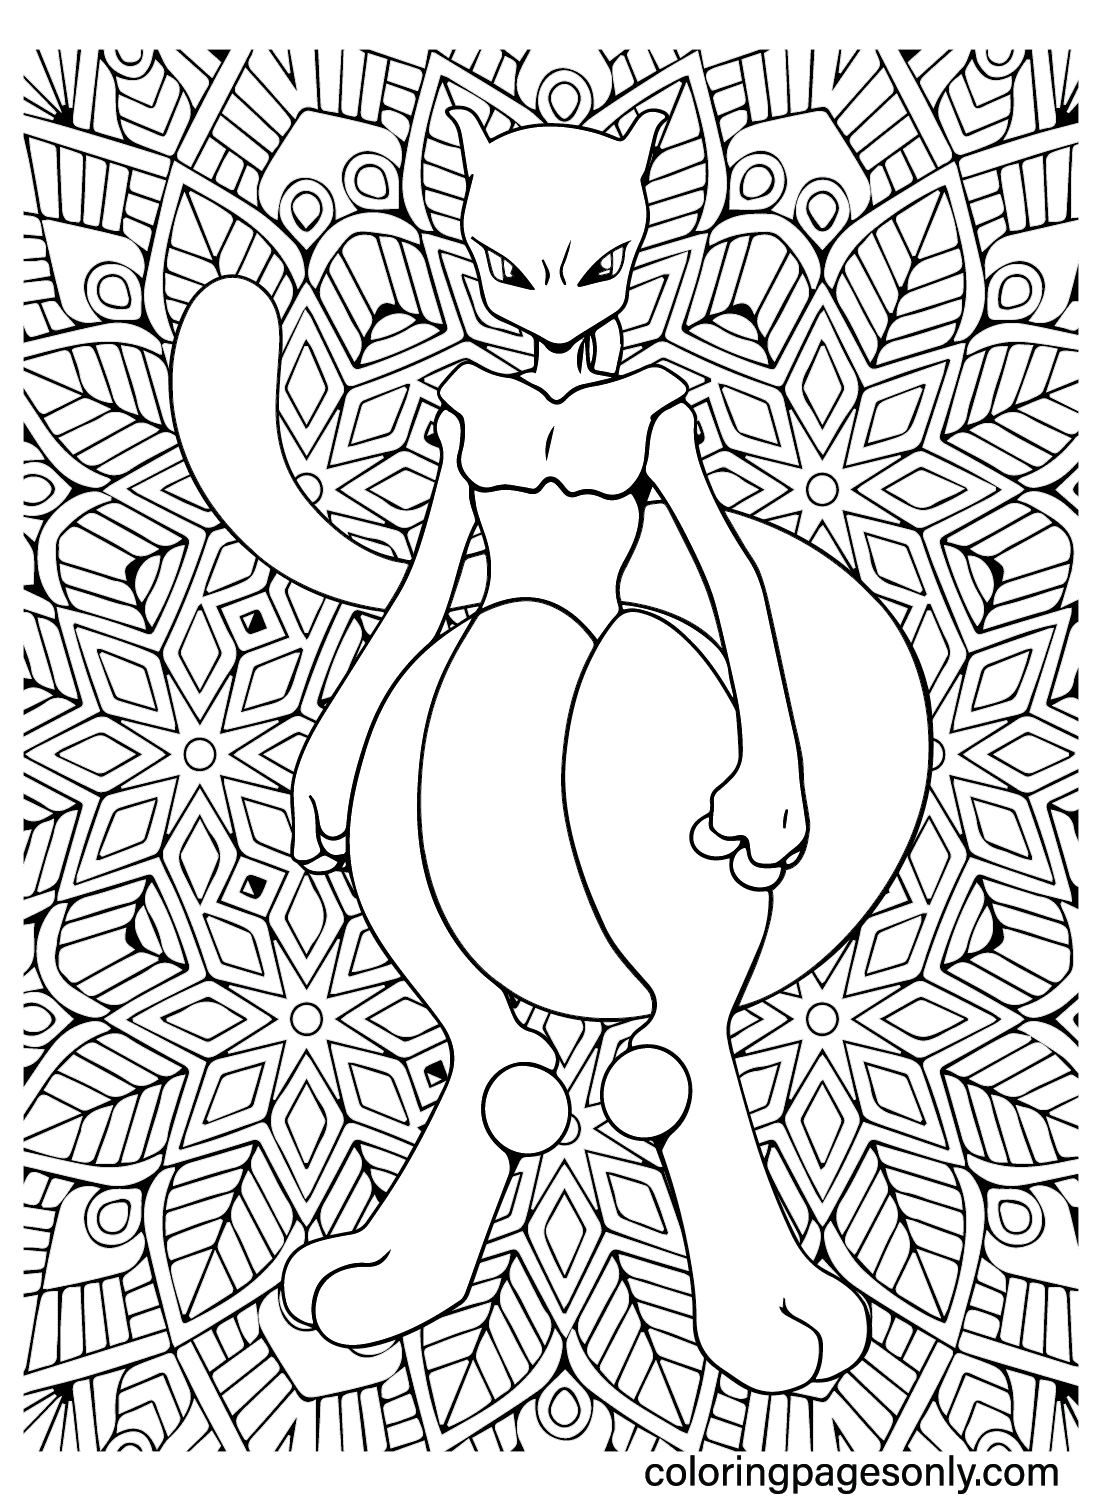 Mewtwo Coloring Pages to Printable from Mewtwo